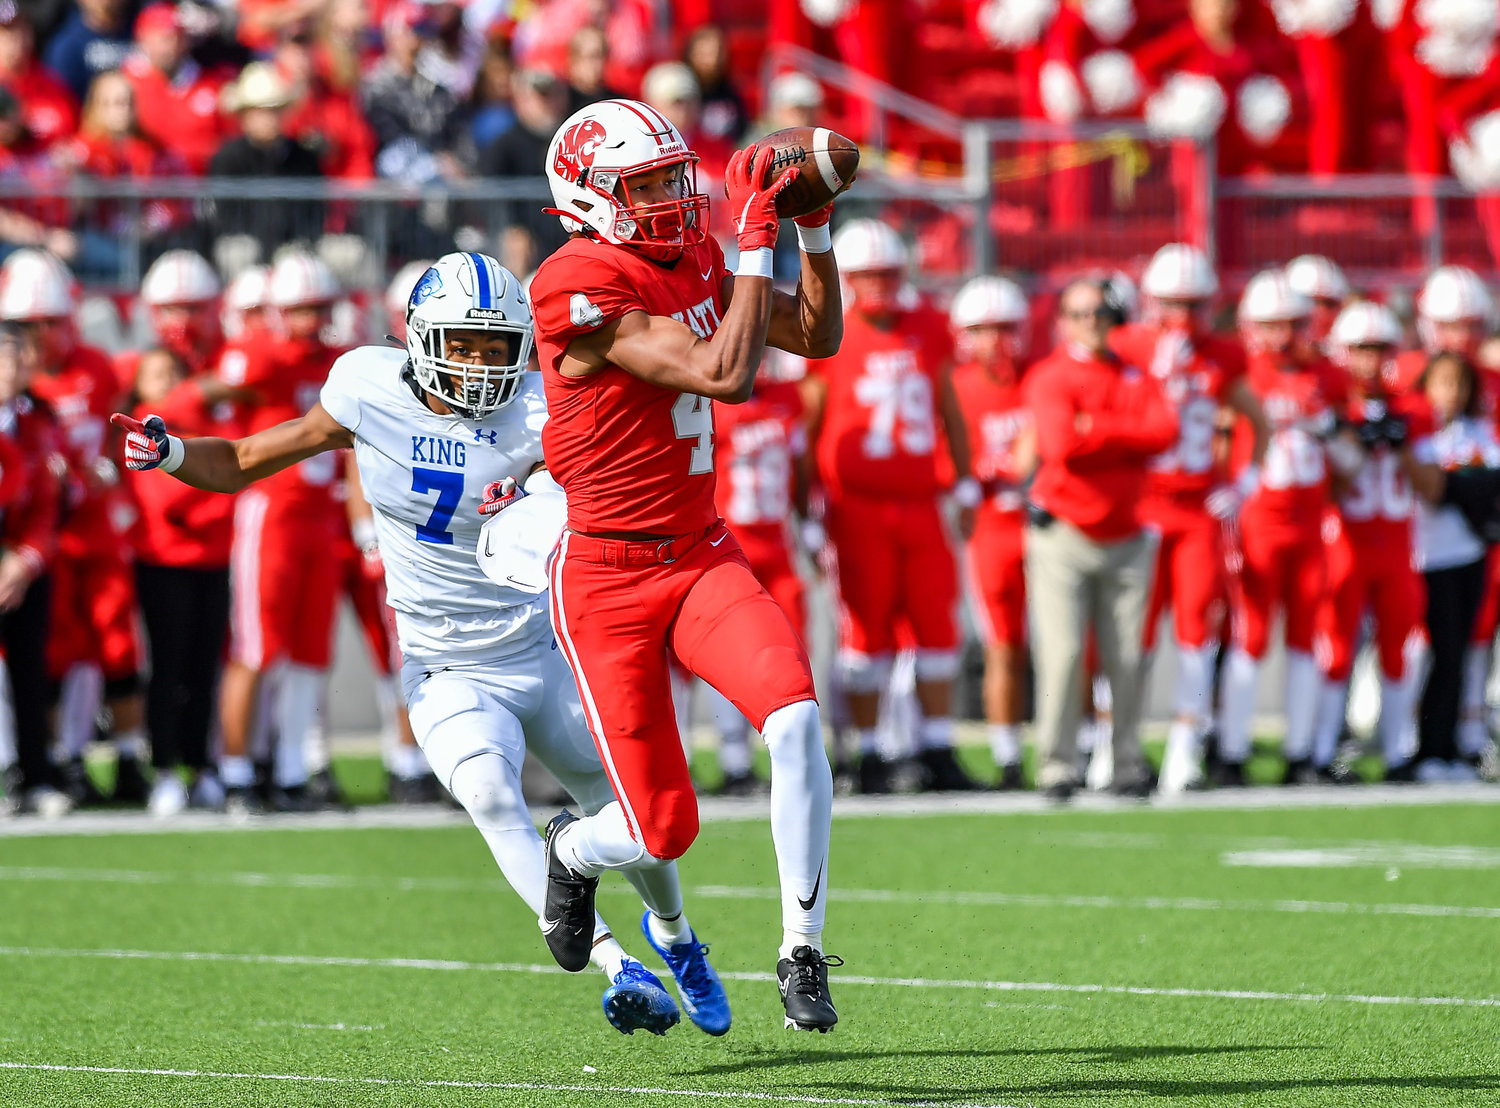 Katy Tx. Nov 26, 2021: Katy's #4 Nic Anderson makes the reception scoring a TD during the first half of the UIL regional playoff game between Katy Tigers and King Panthers at Legacy Stadium in Katy. (Photo by Mark Goodman / Katy Times)